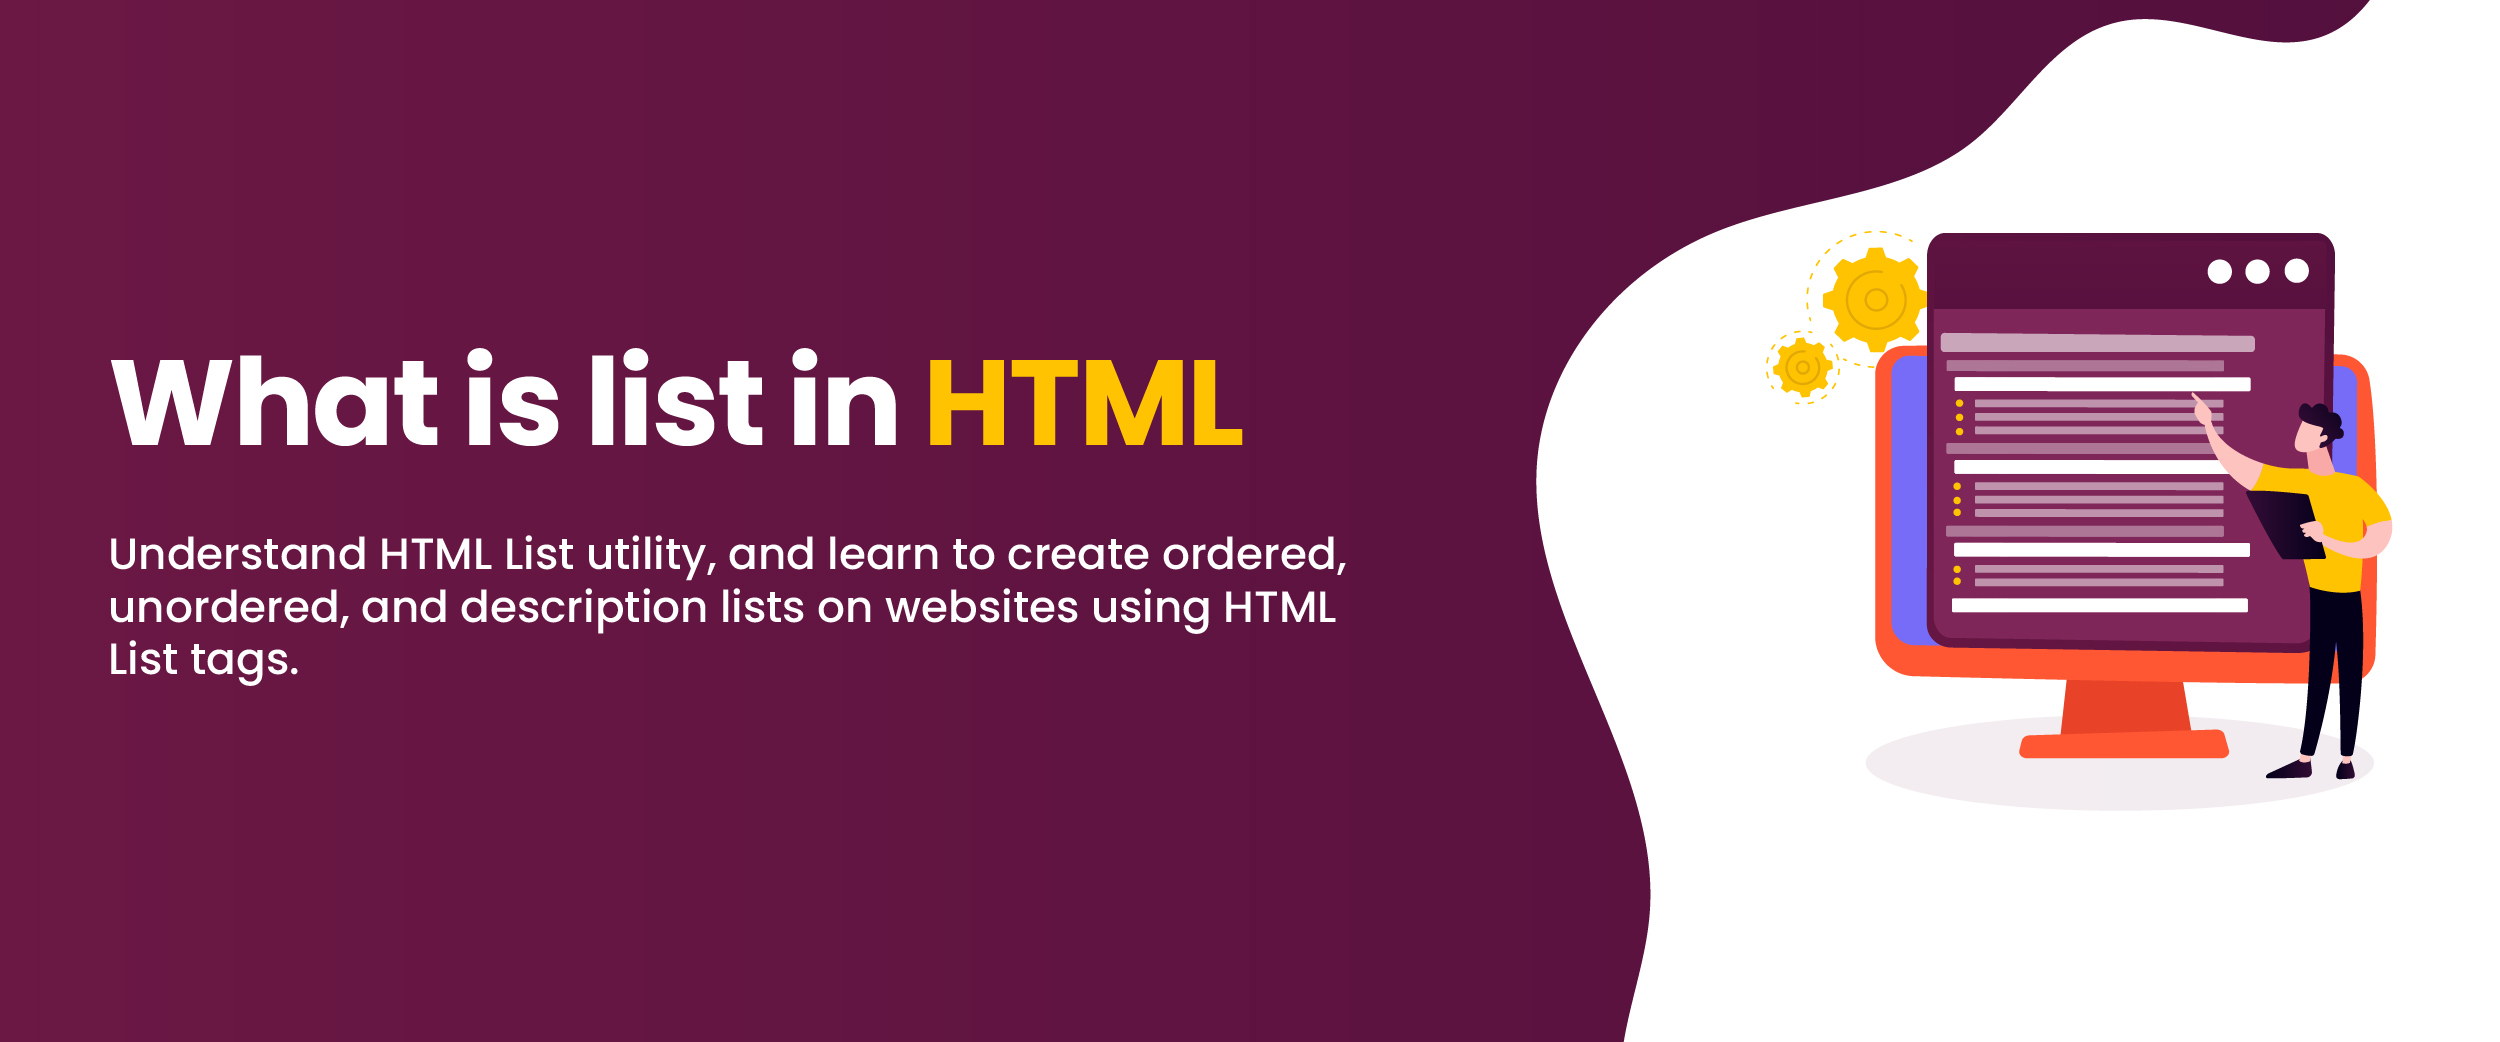 What Is a List in HTML